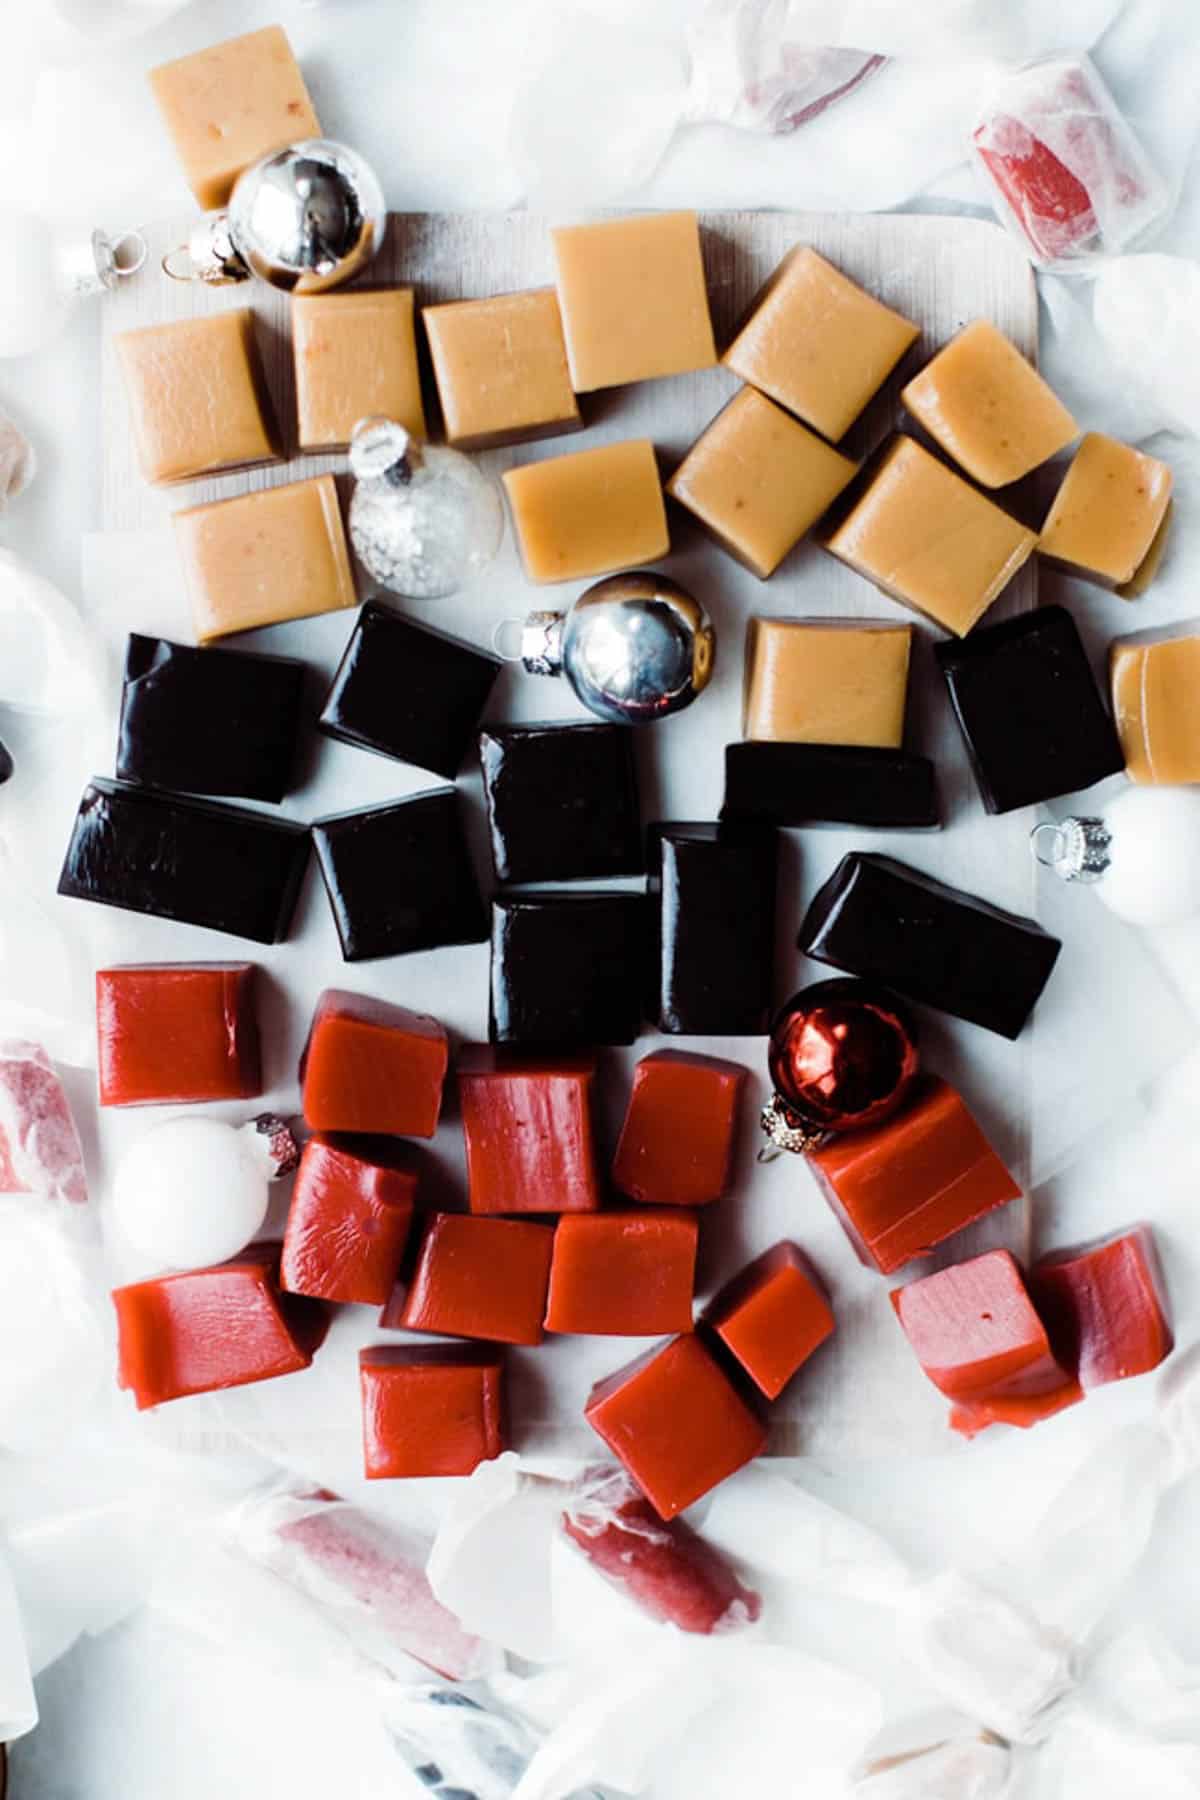 Different varieties of sea salt caramels along with black and red square of caramels.